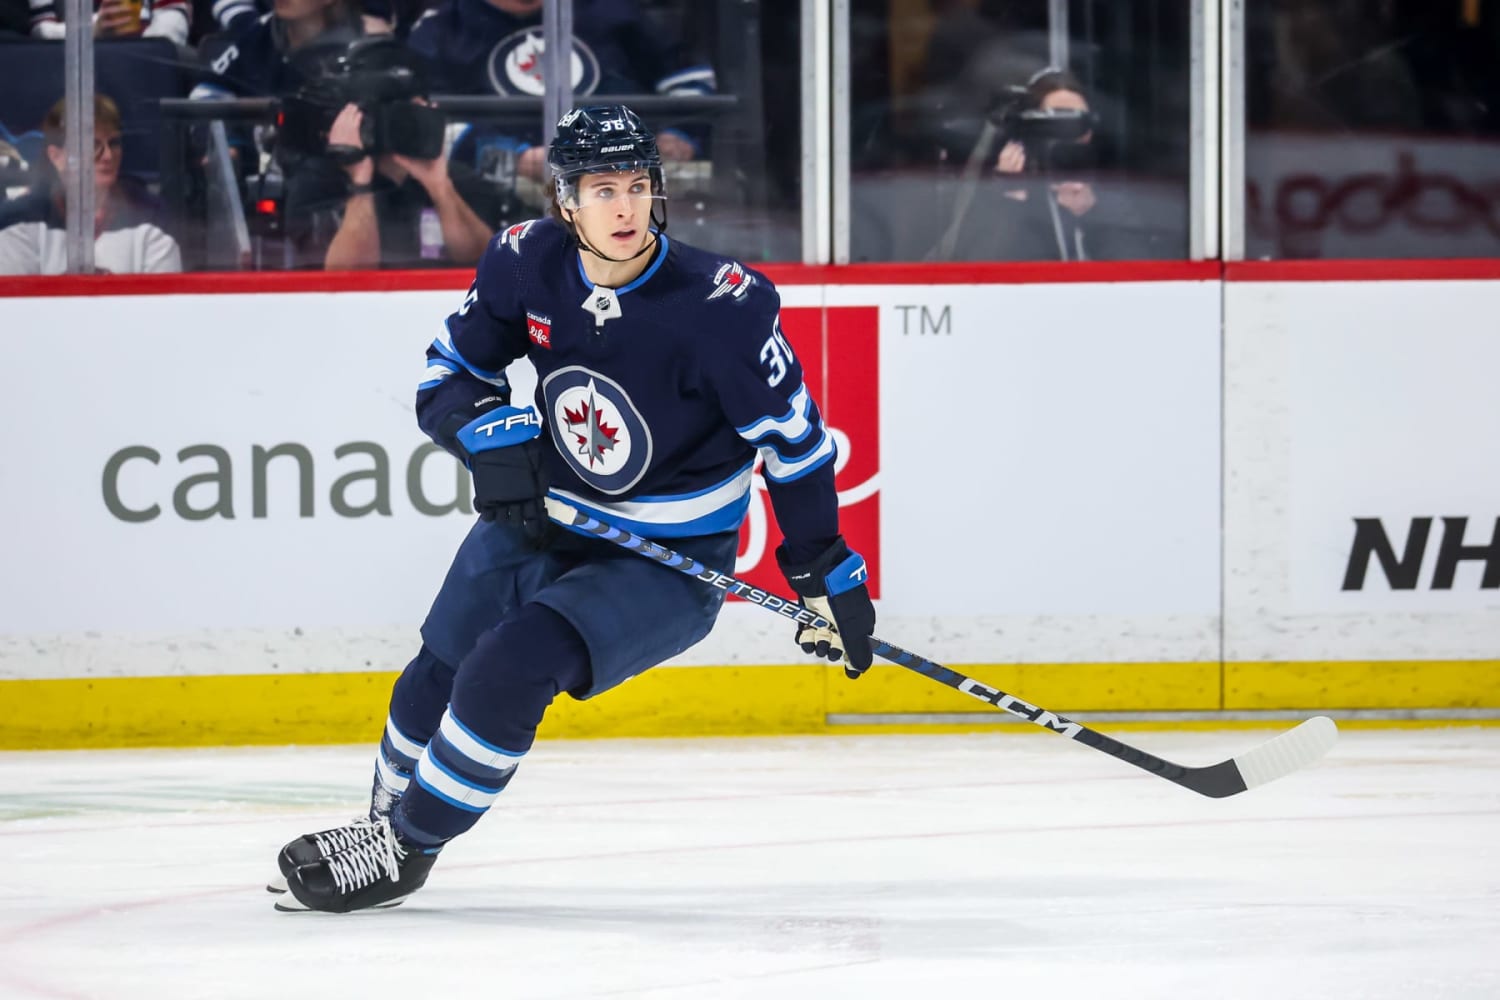 Jets' Barron Receives 75-Plus Stitches After Skate To Face